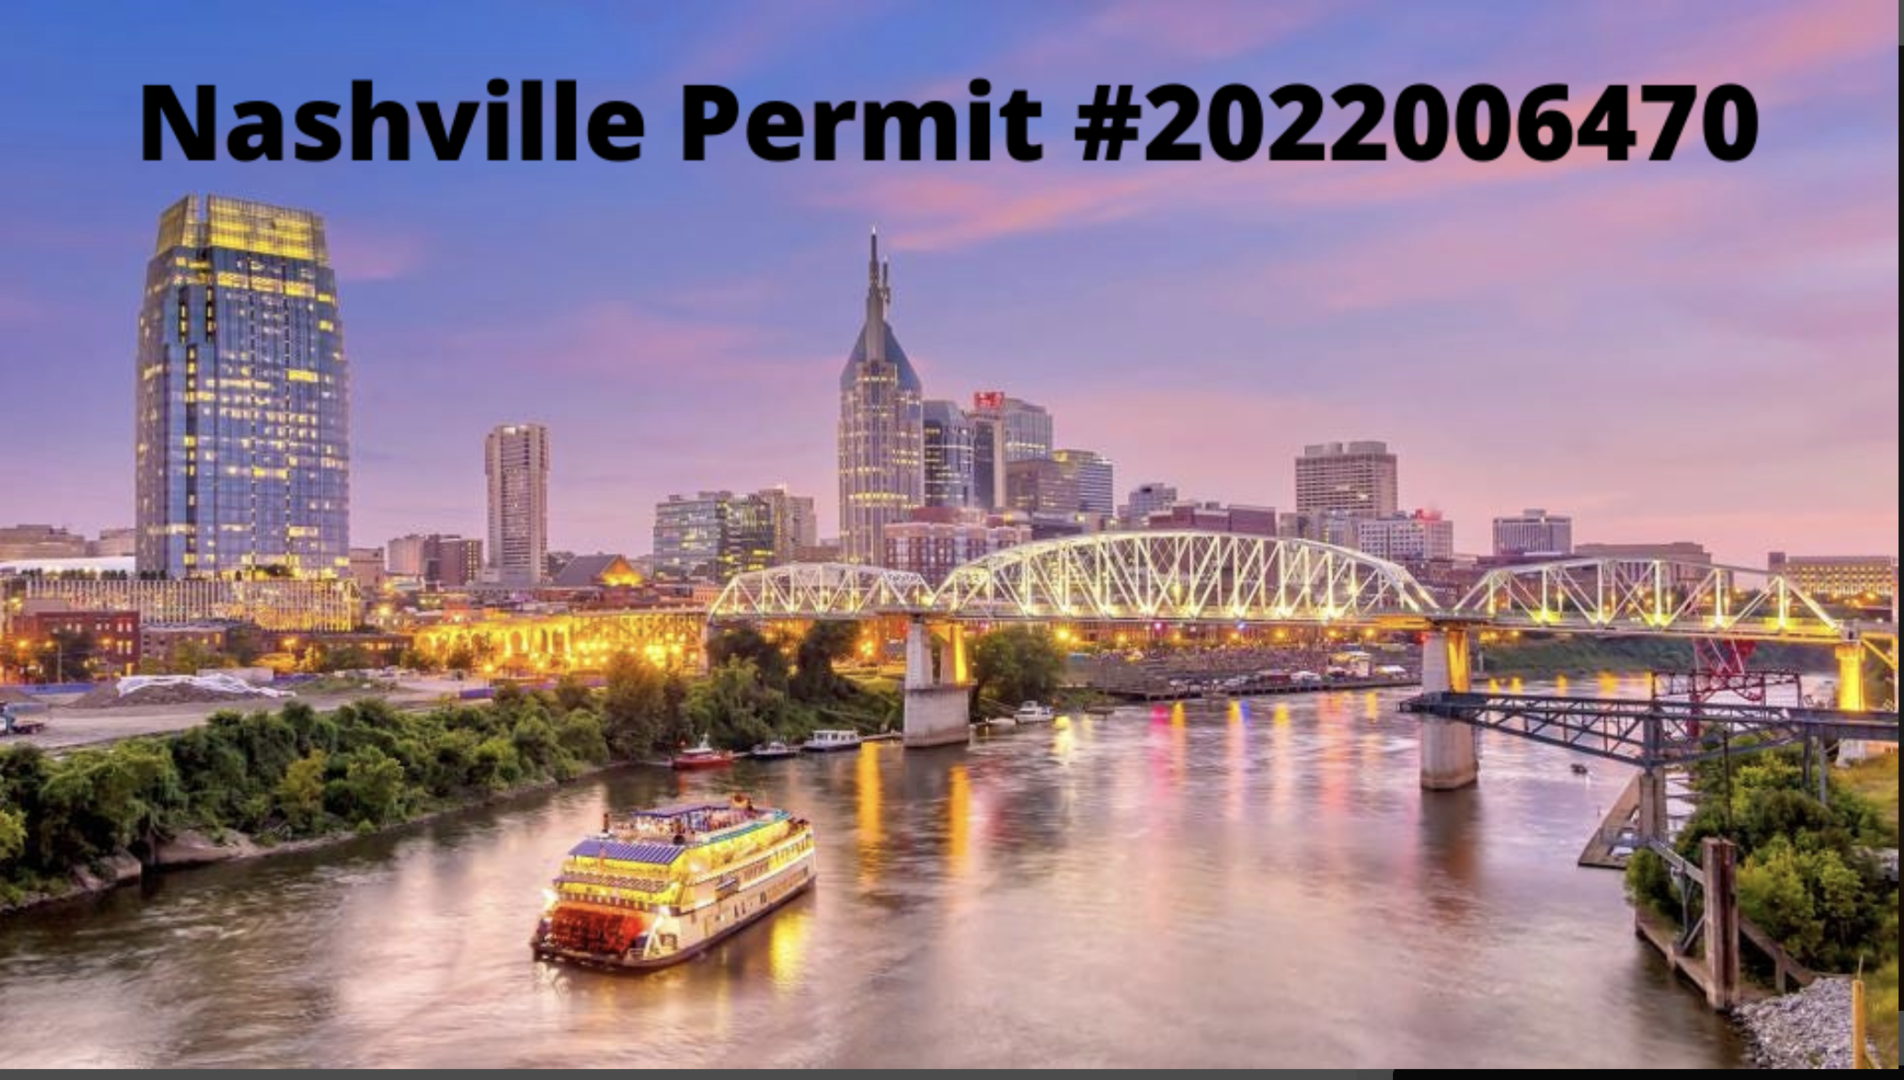 Nashville Permit for 2nd Unit: issued in 2022 followed by:2022006470